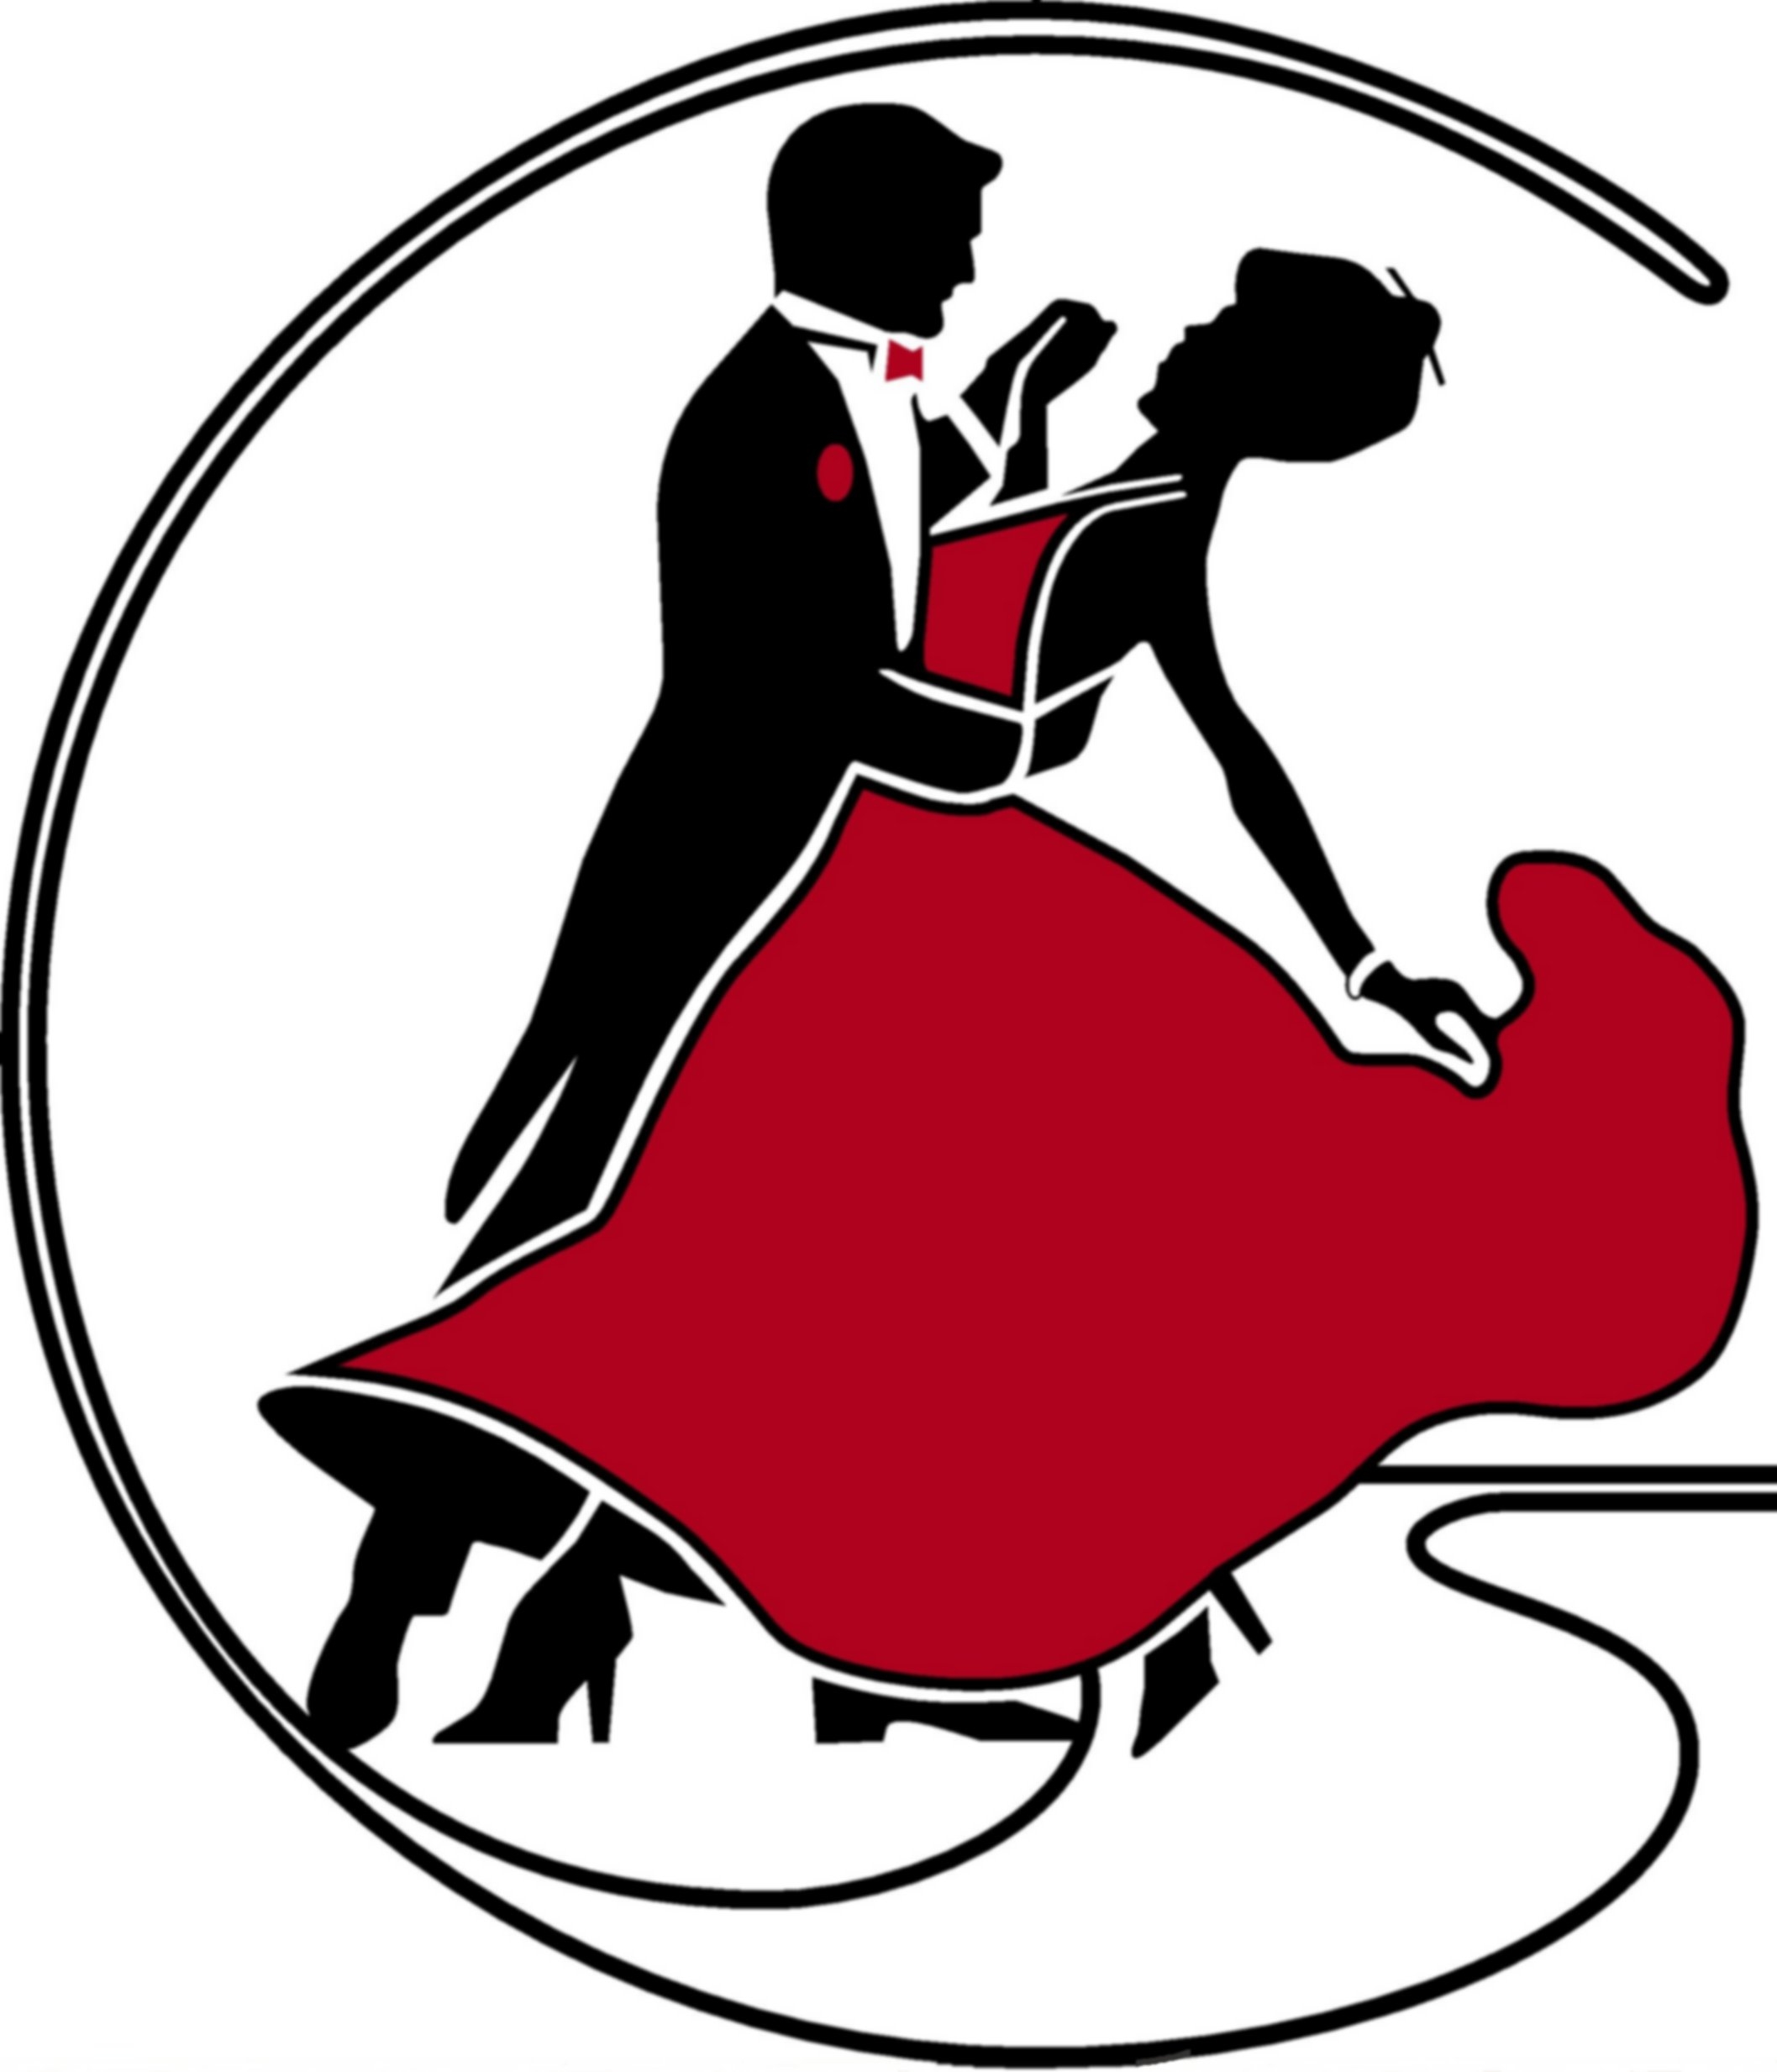 Couples dancing clipart 4 » Clipart Station.